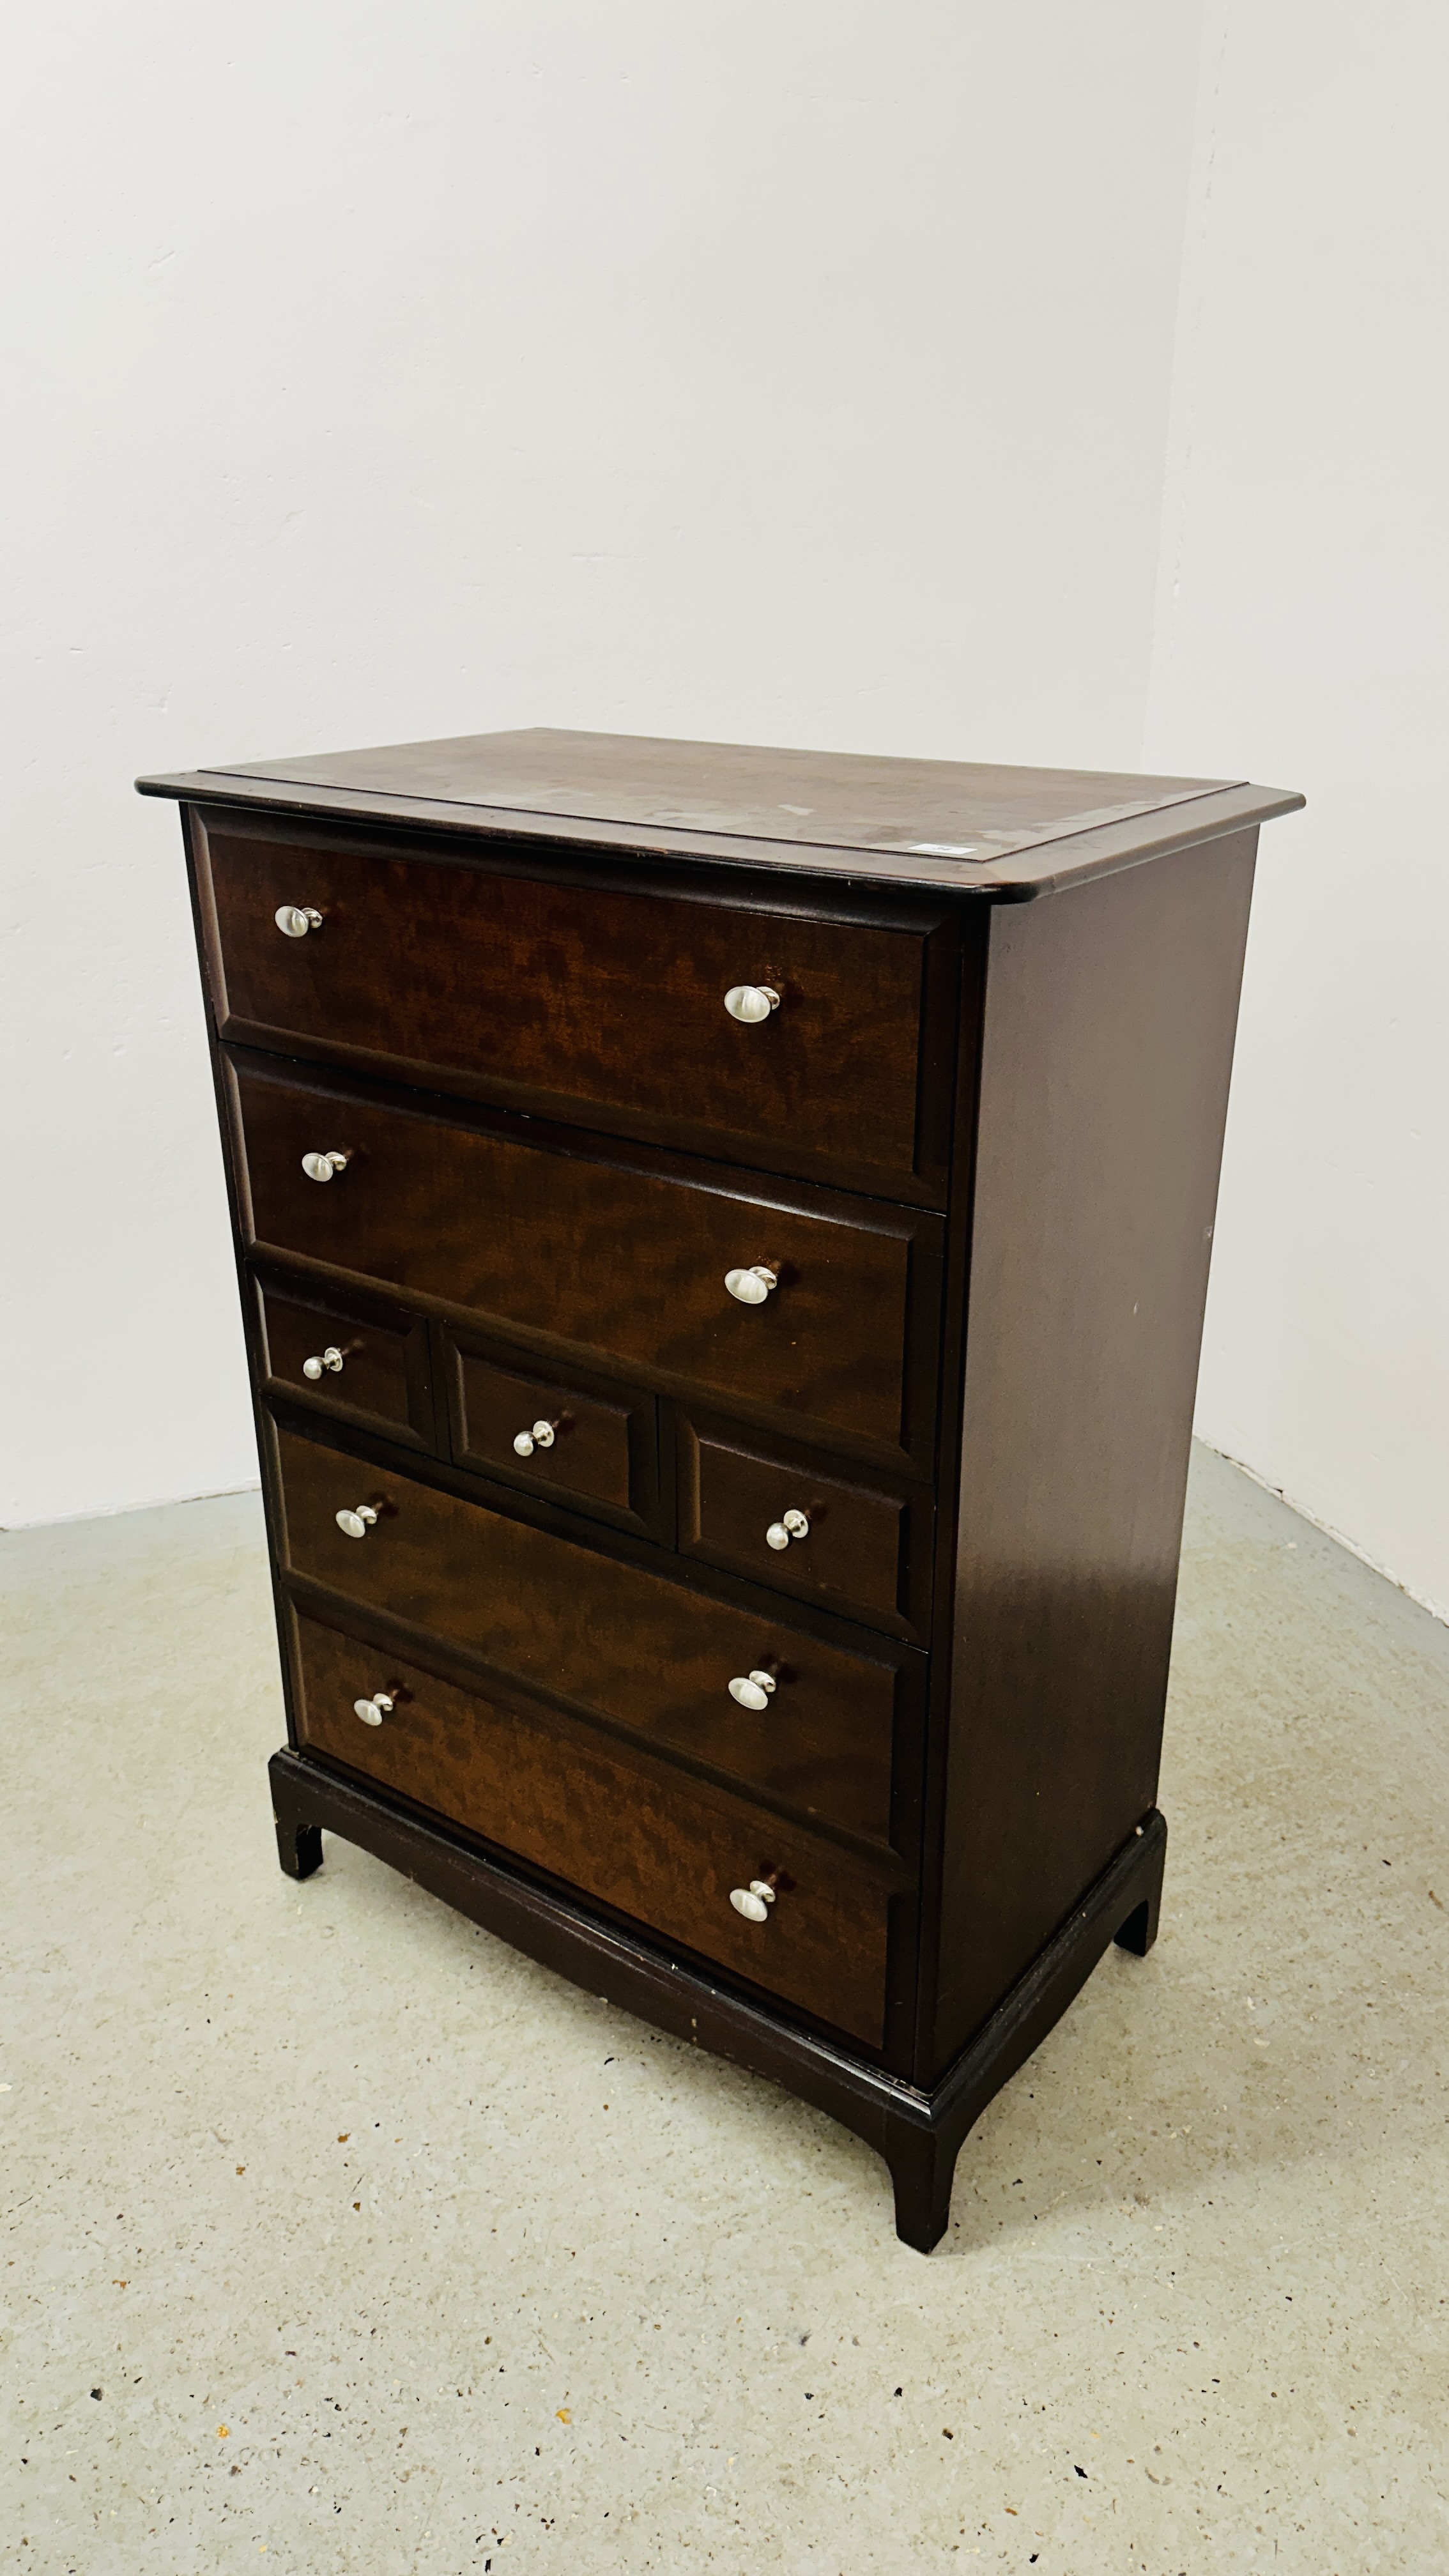 A STAG 7 MULTI DRAWER CHEST OF DRAWERS - W 82CM X D 46.5CM X H 110CM. - Image 2 of 7